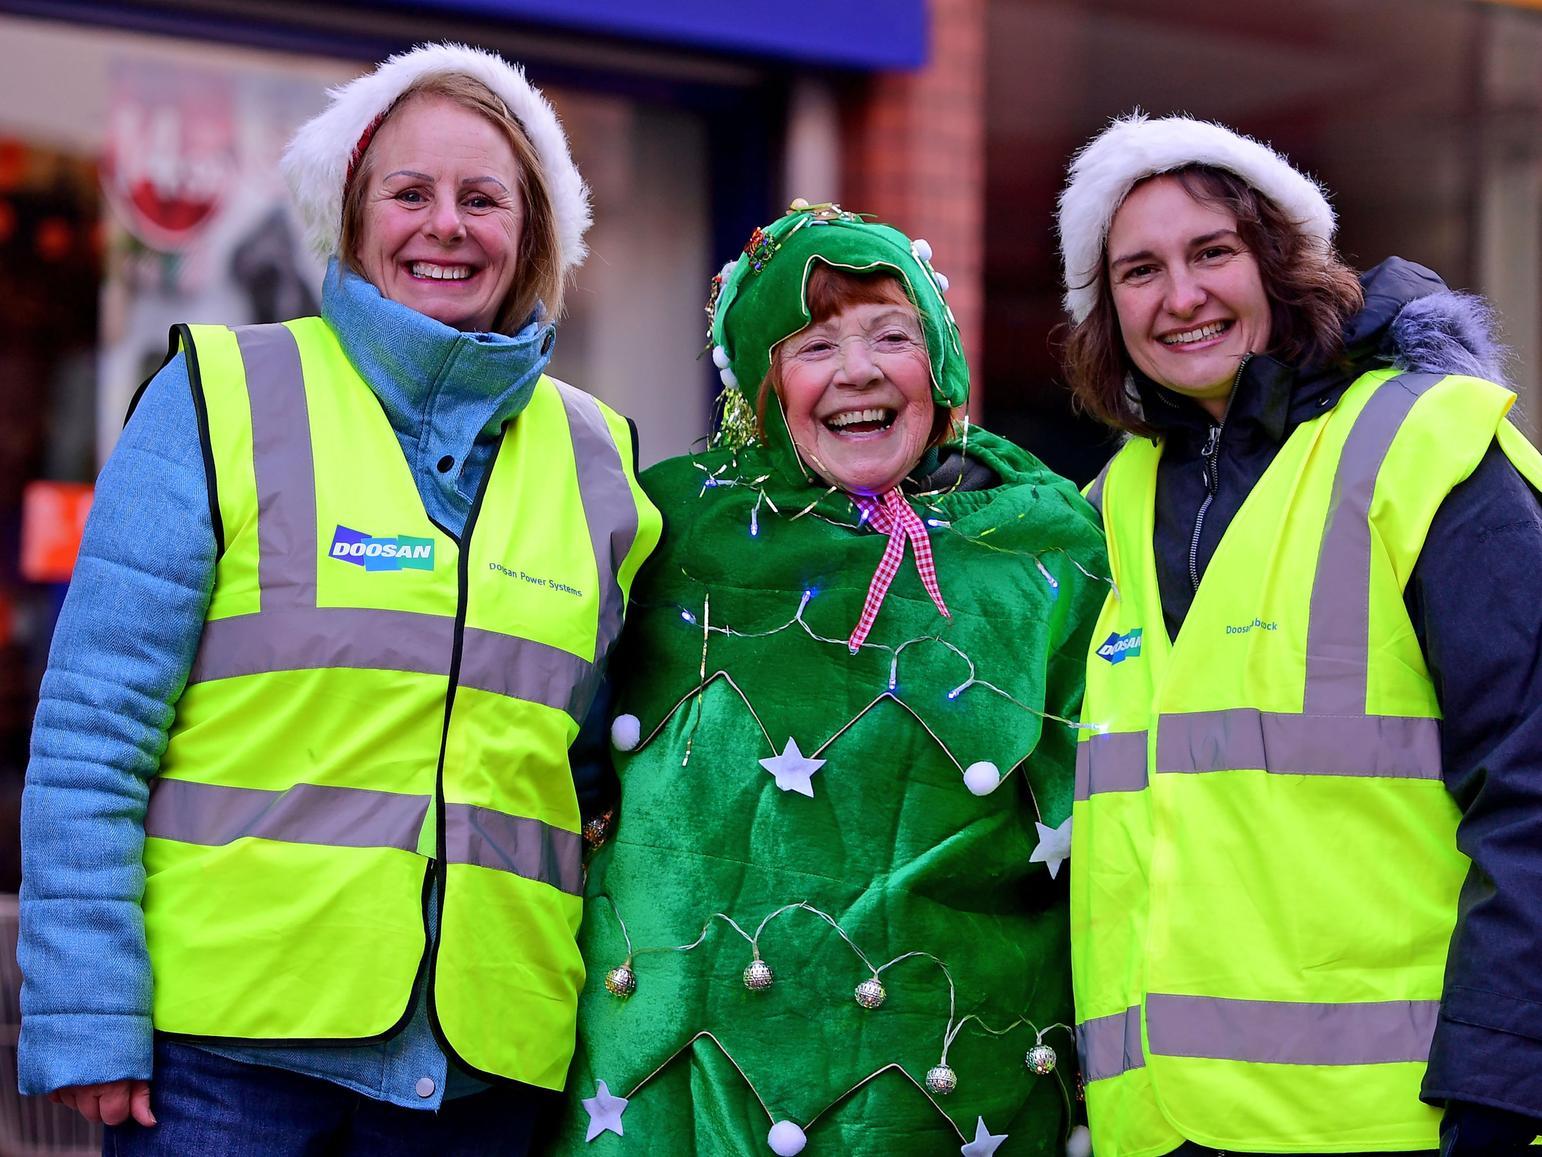 Bright smiles to light up the town this Christmas!